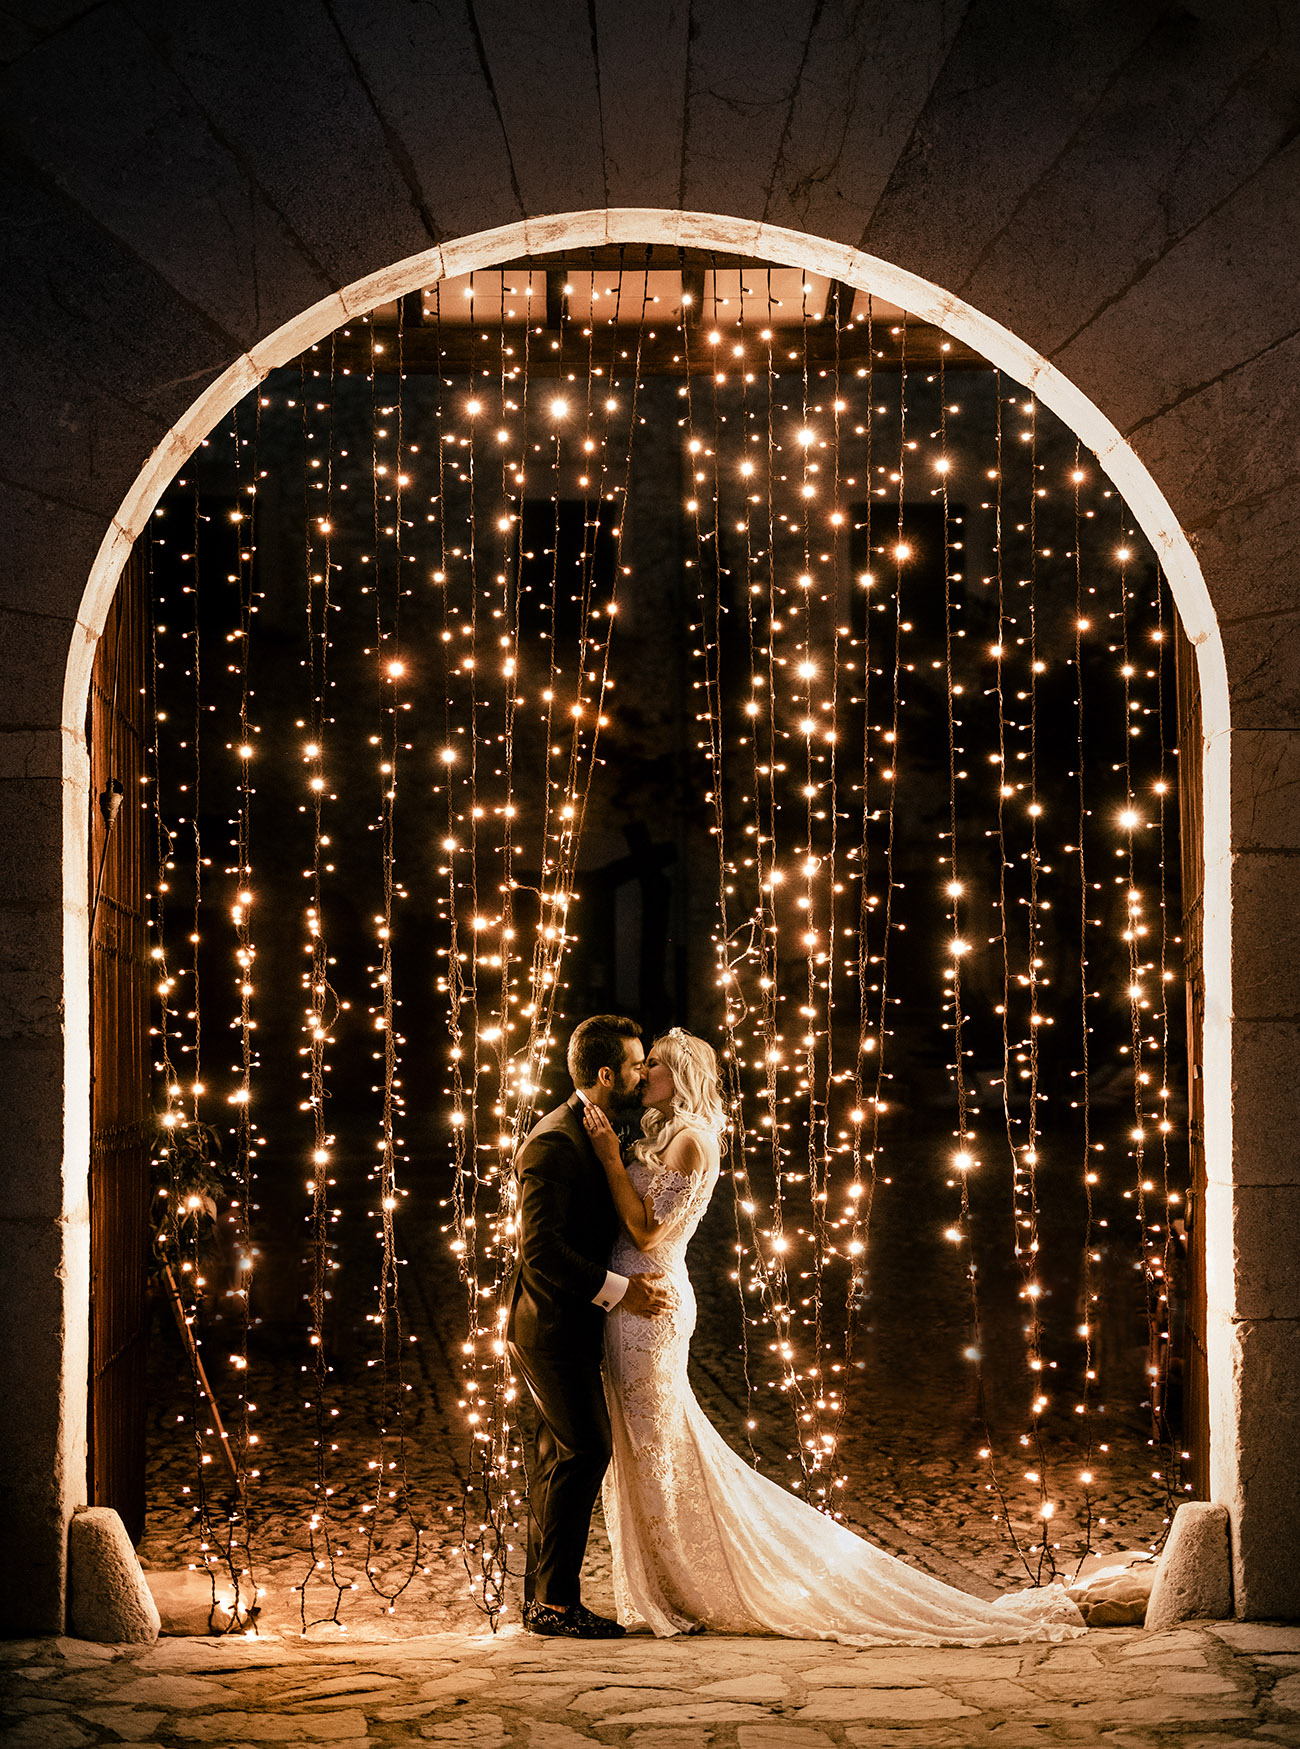 Carter Lace Wedding Dress by Lovers Society x Green Wedding Shoes Under a String of Lights